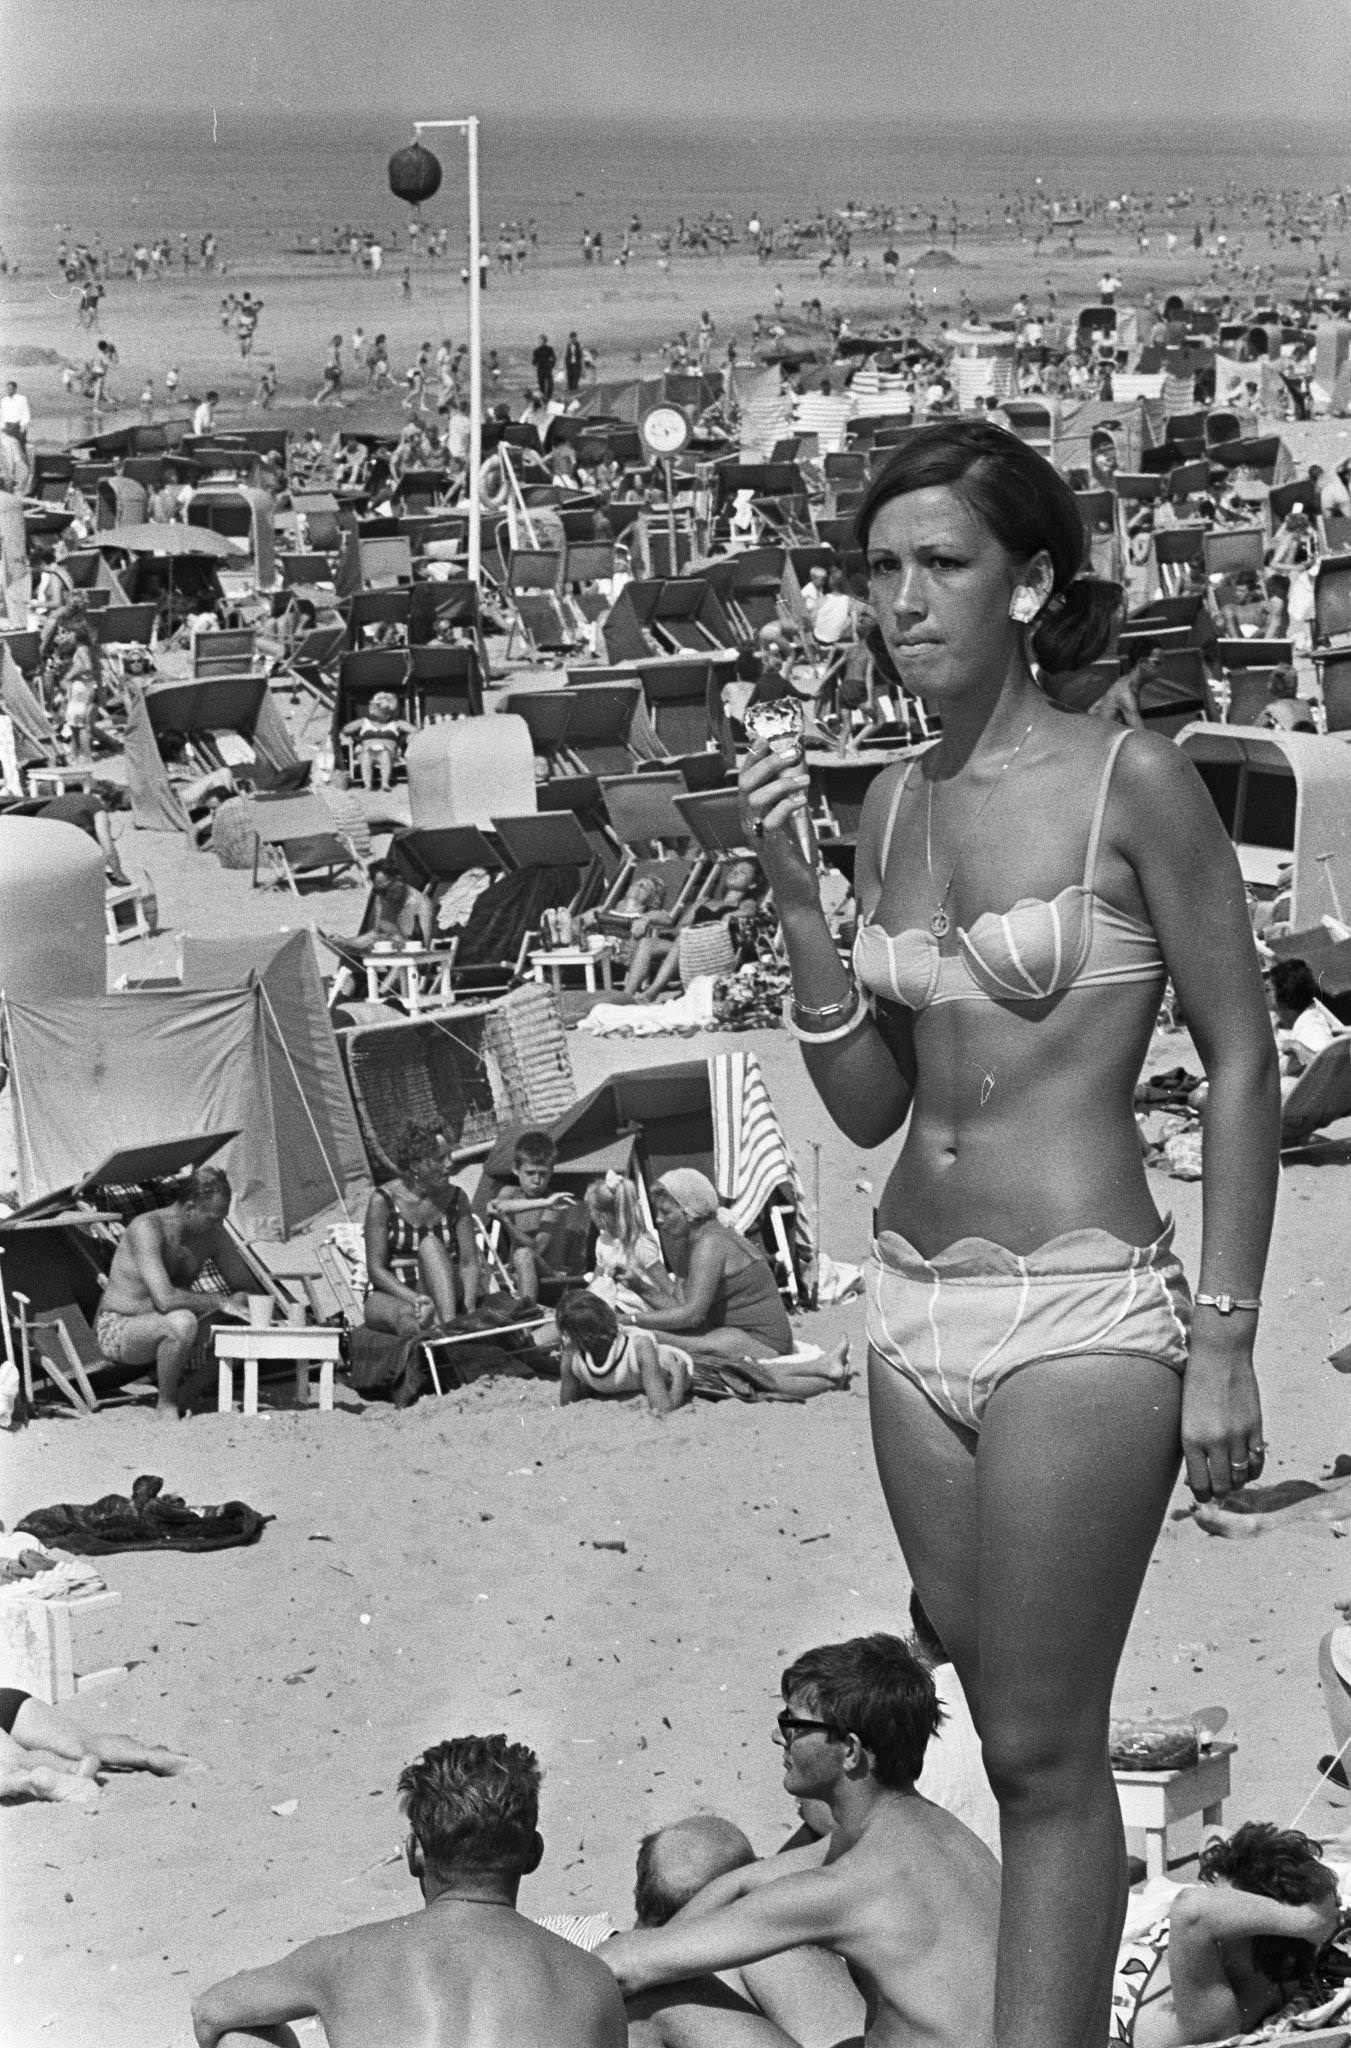 Nice weather at the beach, 1965